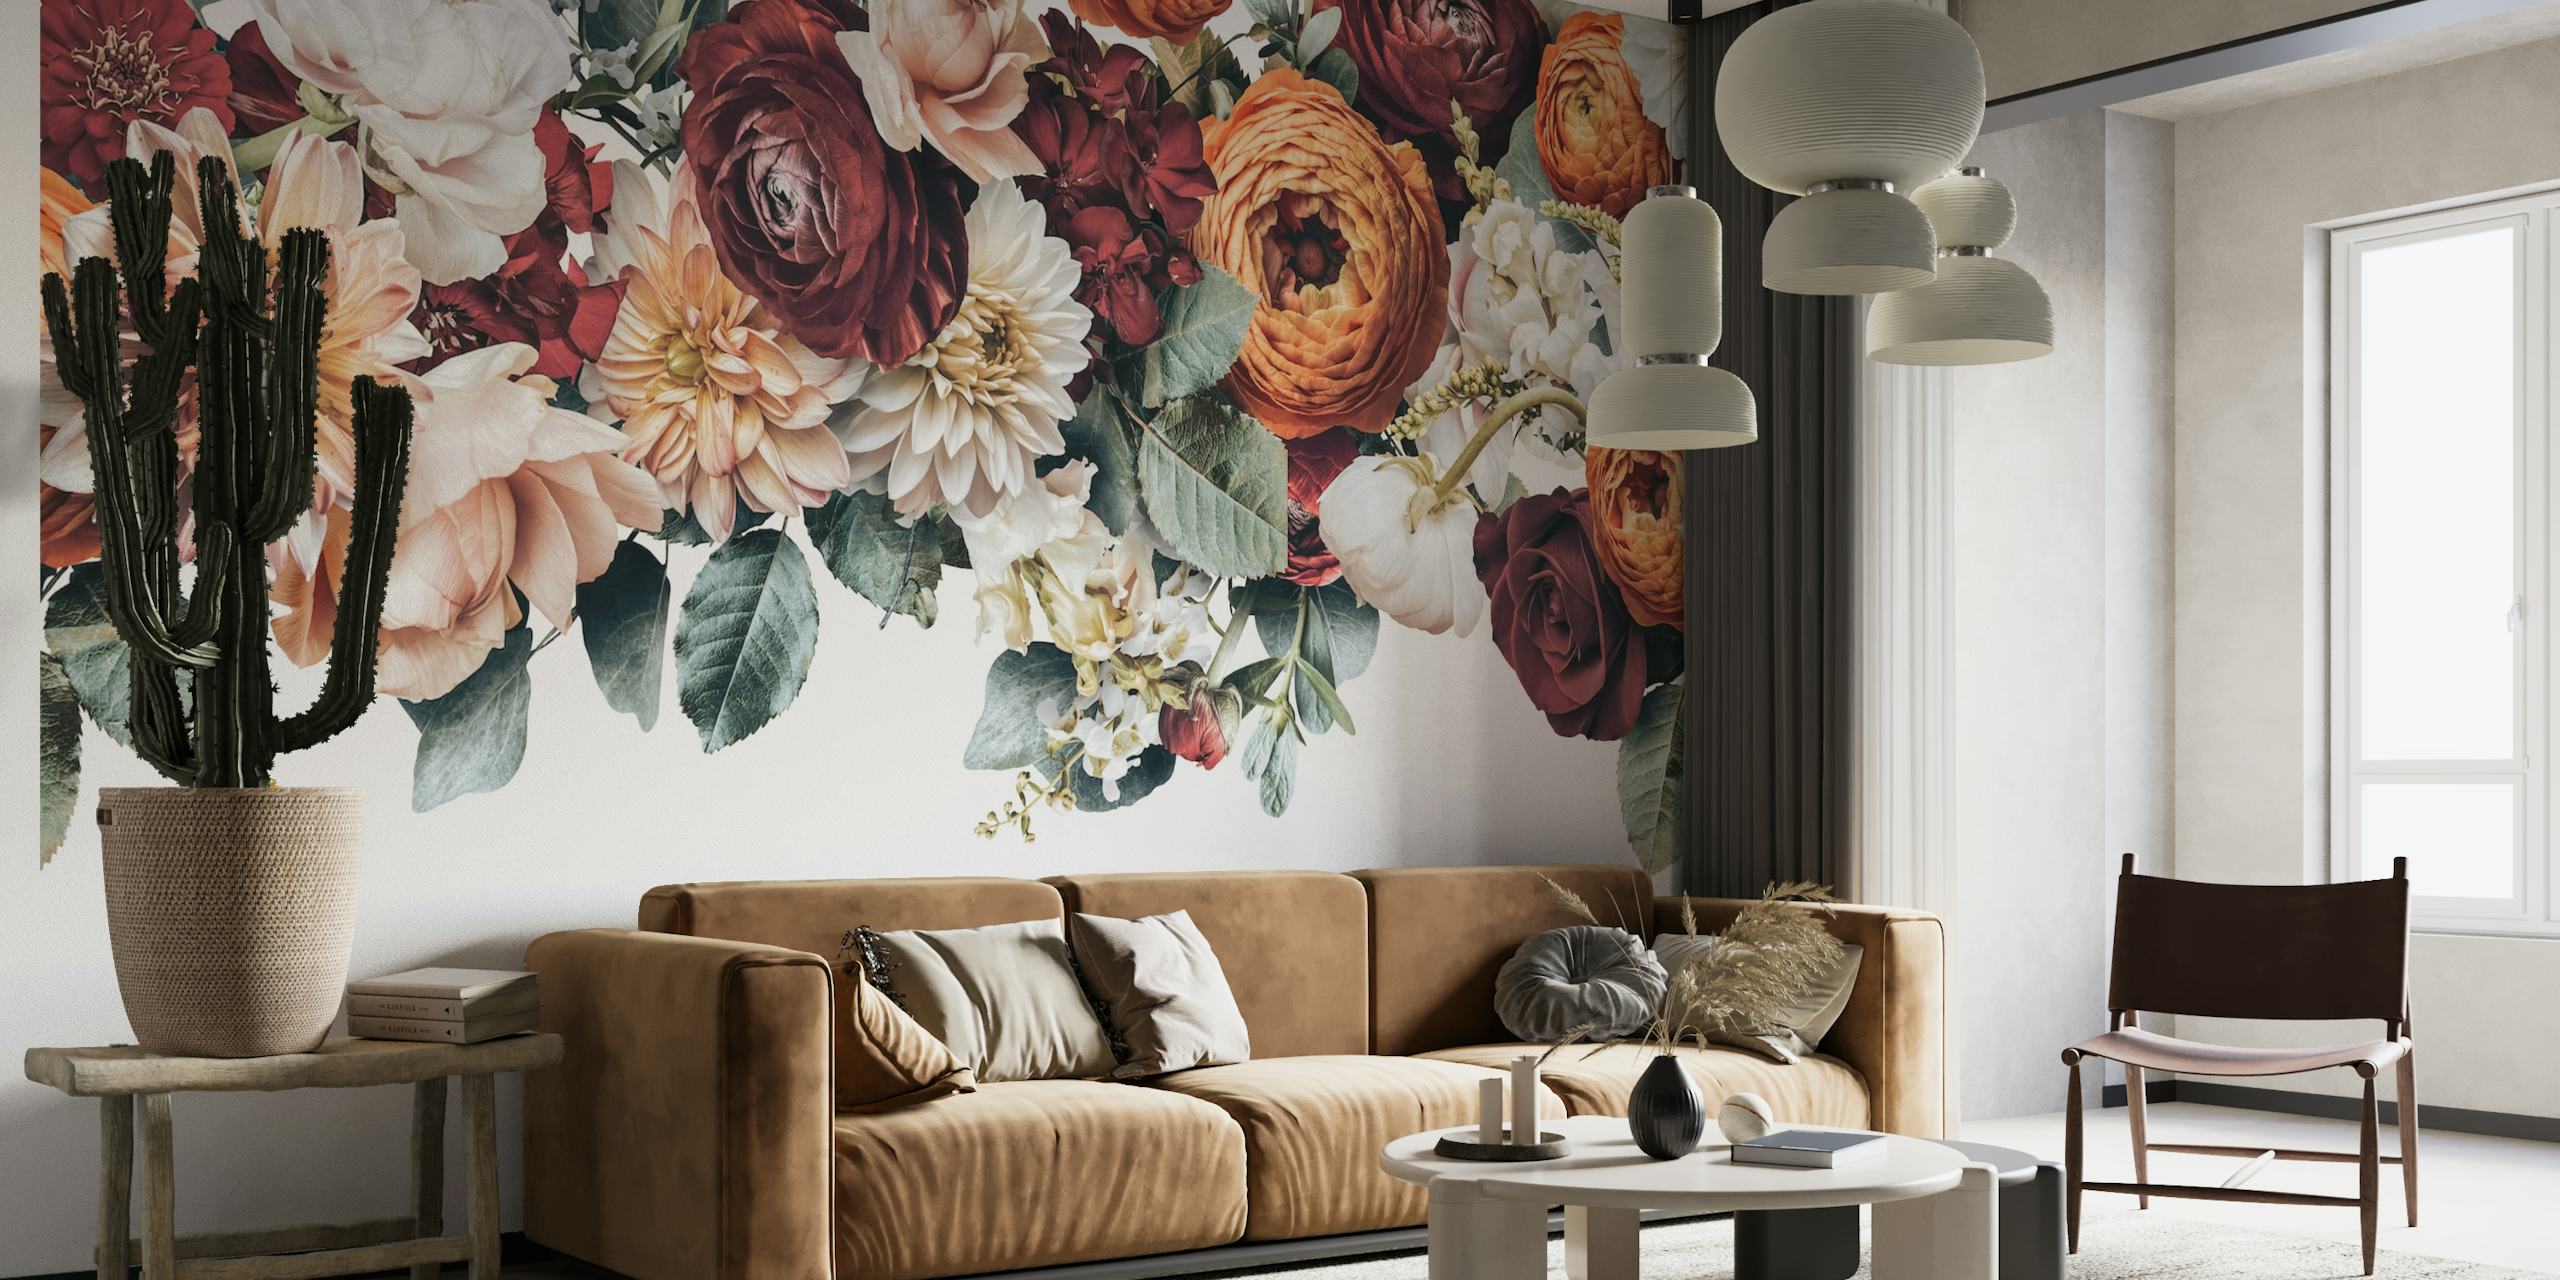 Floral wall mural with summer flowers including peonies, roses, and ranunculus on a clear background - Summerflower Border